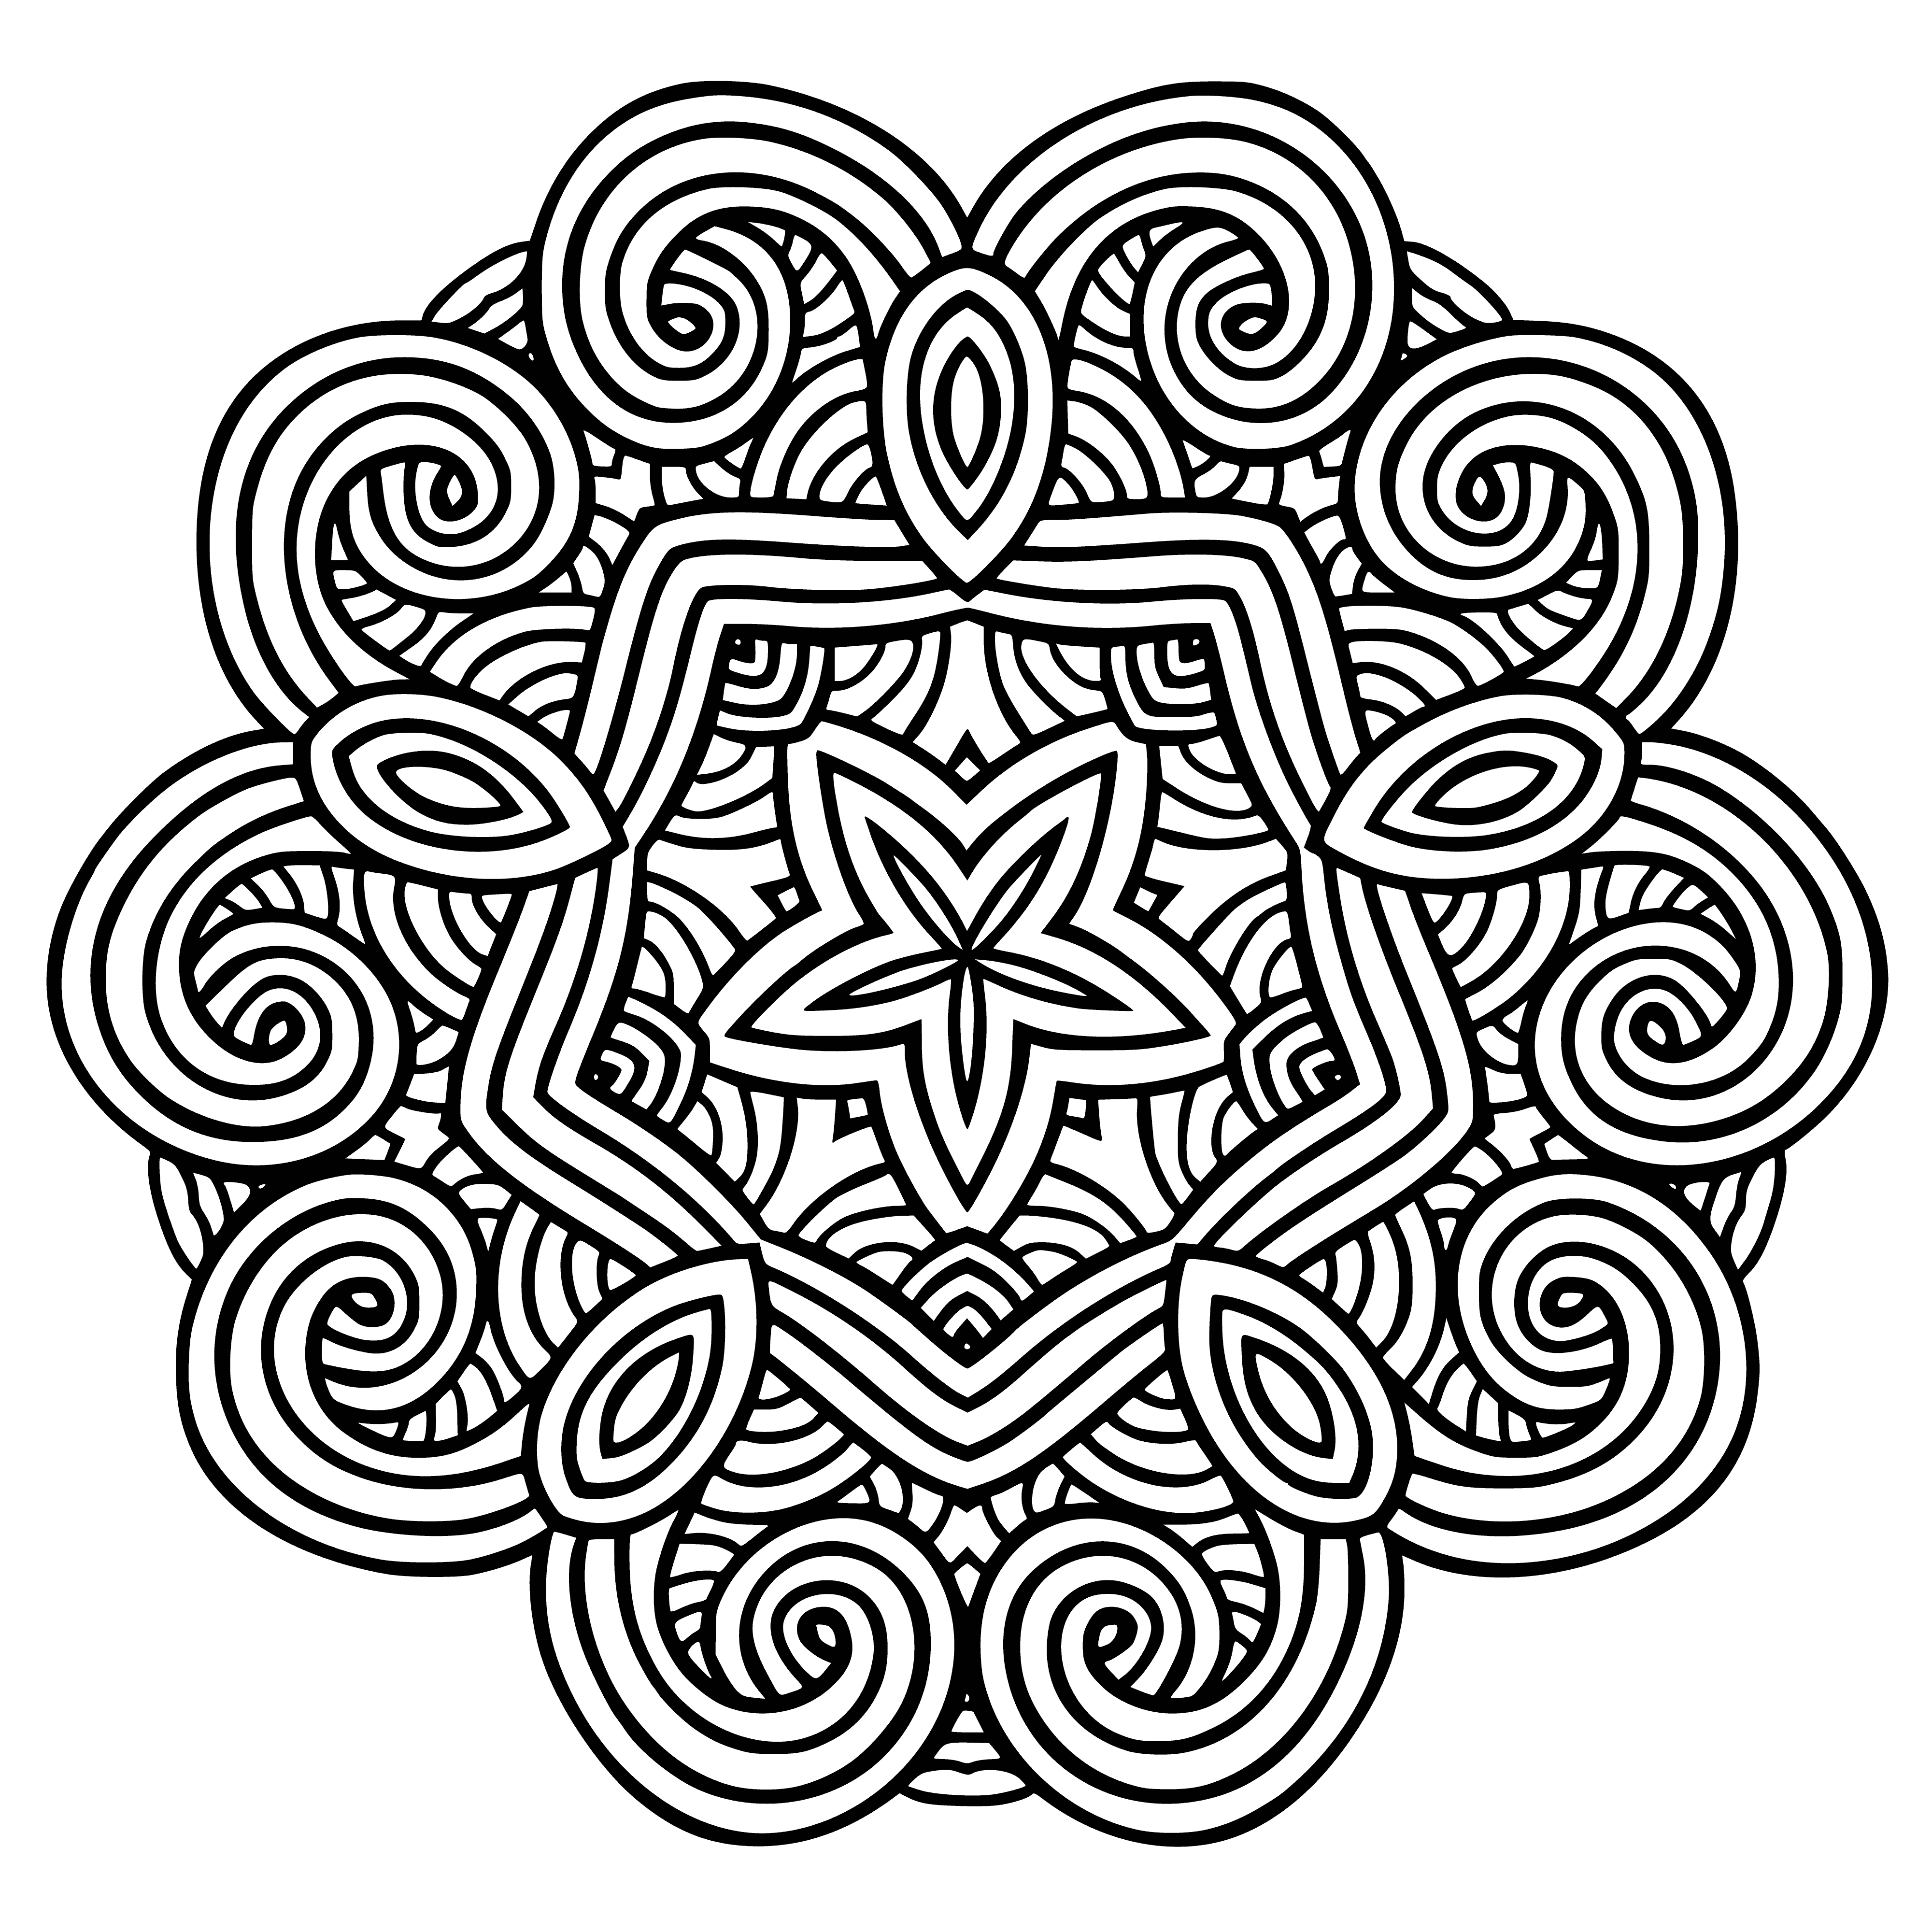 coloring page: Mandala is a circular design symbolizing the universe, often with sun, moon, stars, animals, plants. Often used in sand painting.